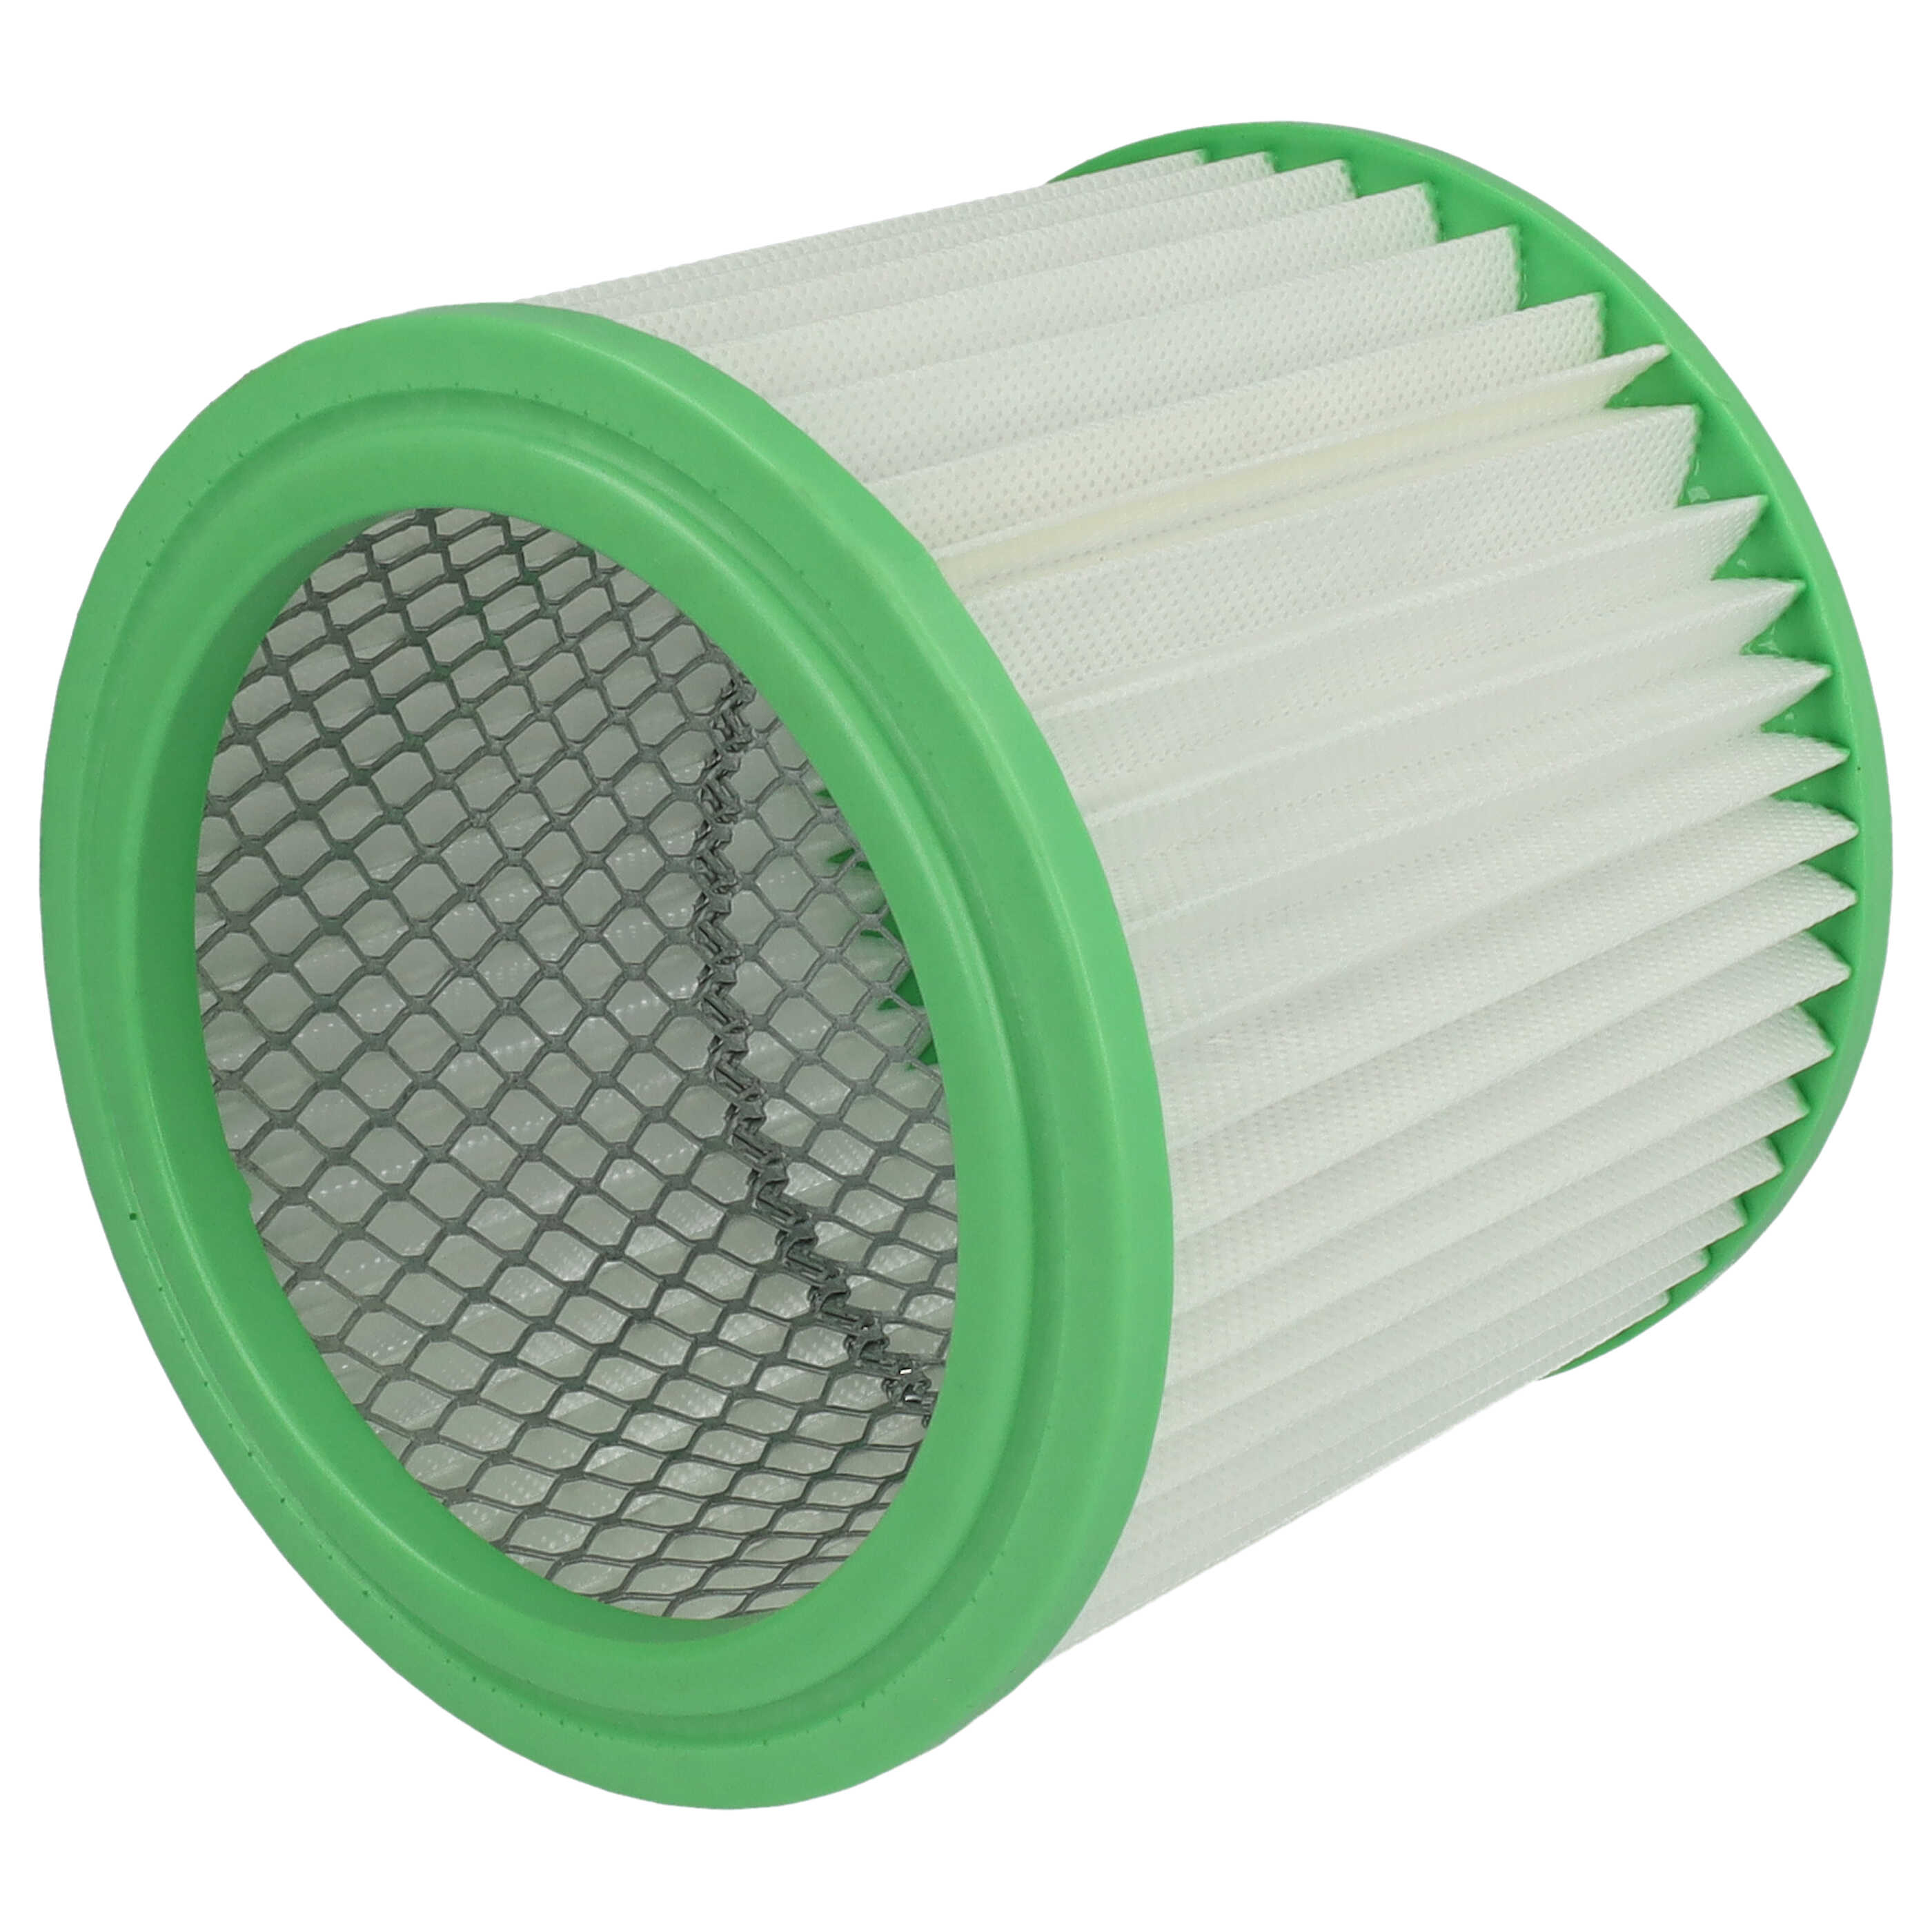 1x cartridge filter replaces Einhell AFF 18, 235163001013 for Parkside Chimney Sweep Vacuum, white / green